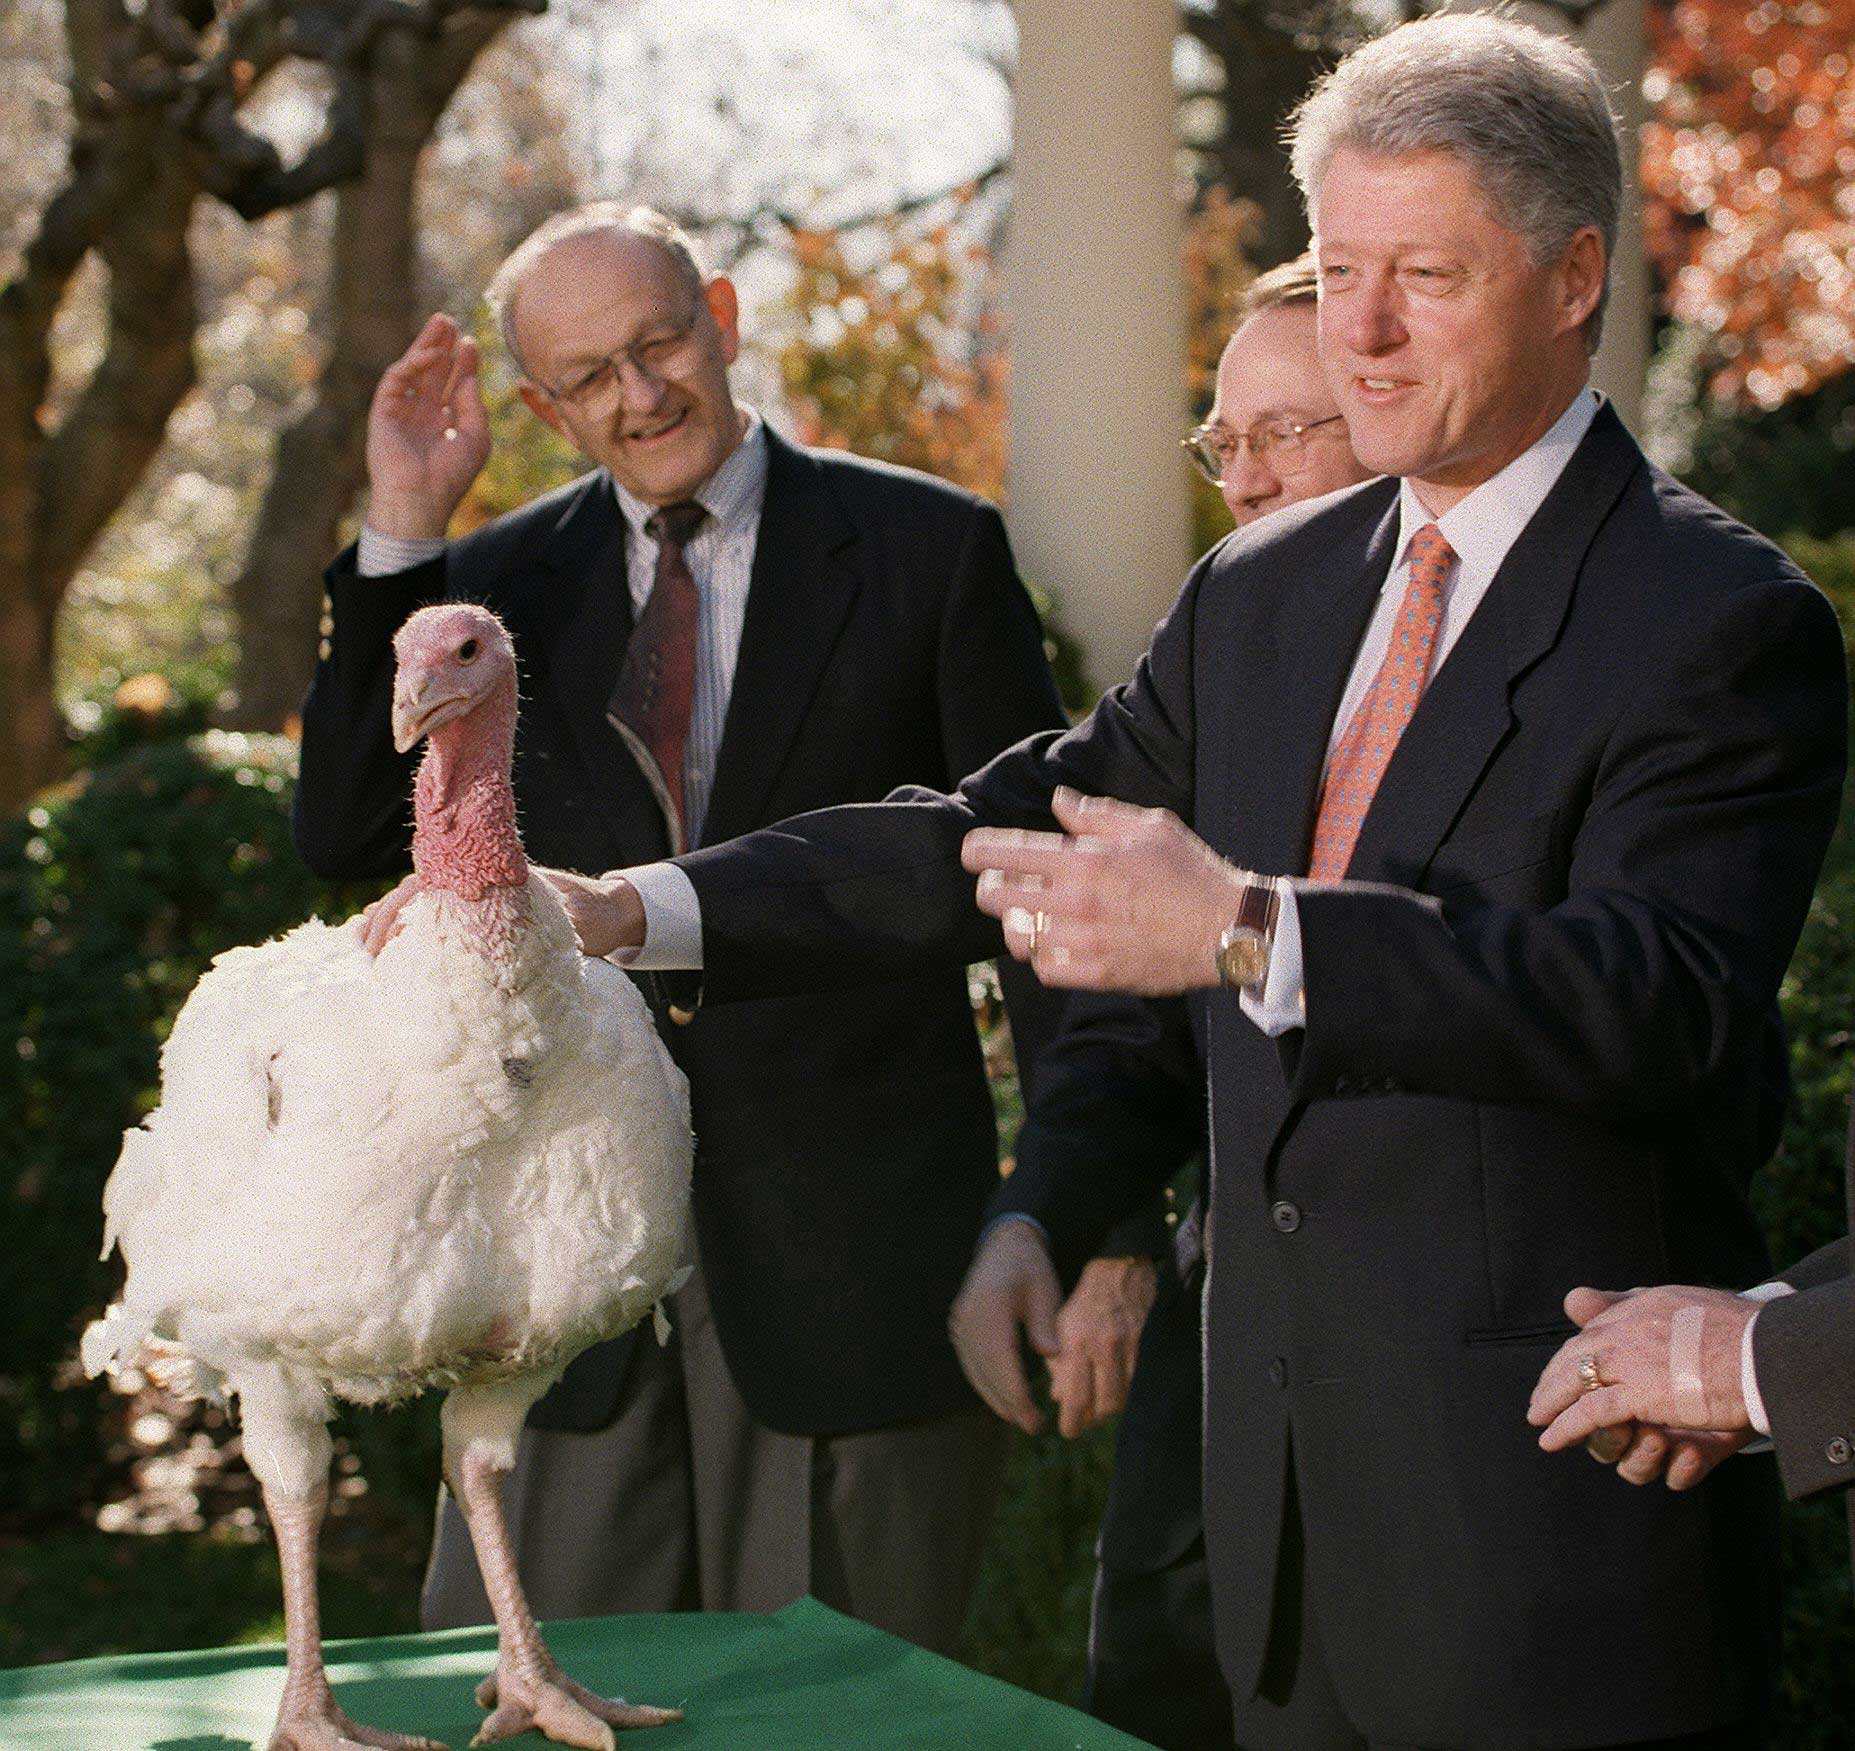 President Bill Clinton stands with the annual Thanksgiving turkey as his handler looks on during presentation ceremonies on Nov. 24, 1998 at the White House in Washington, D.C.